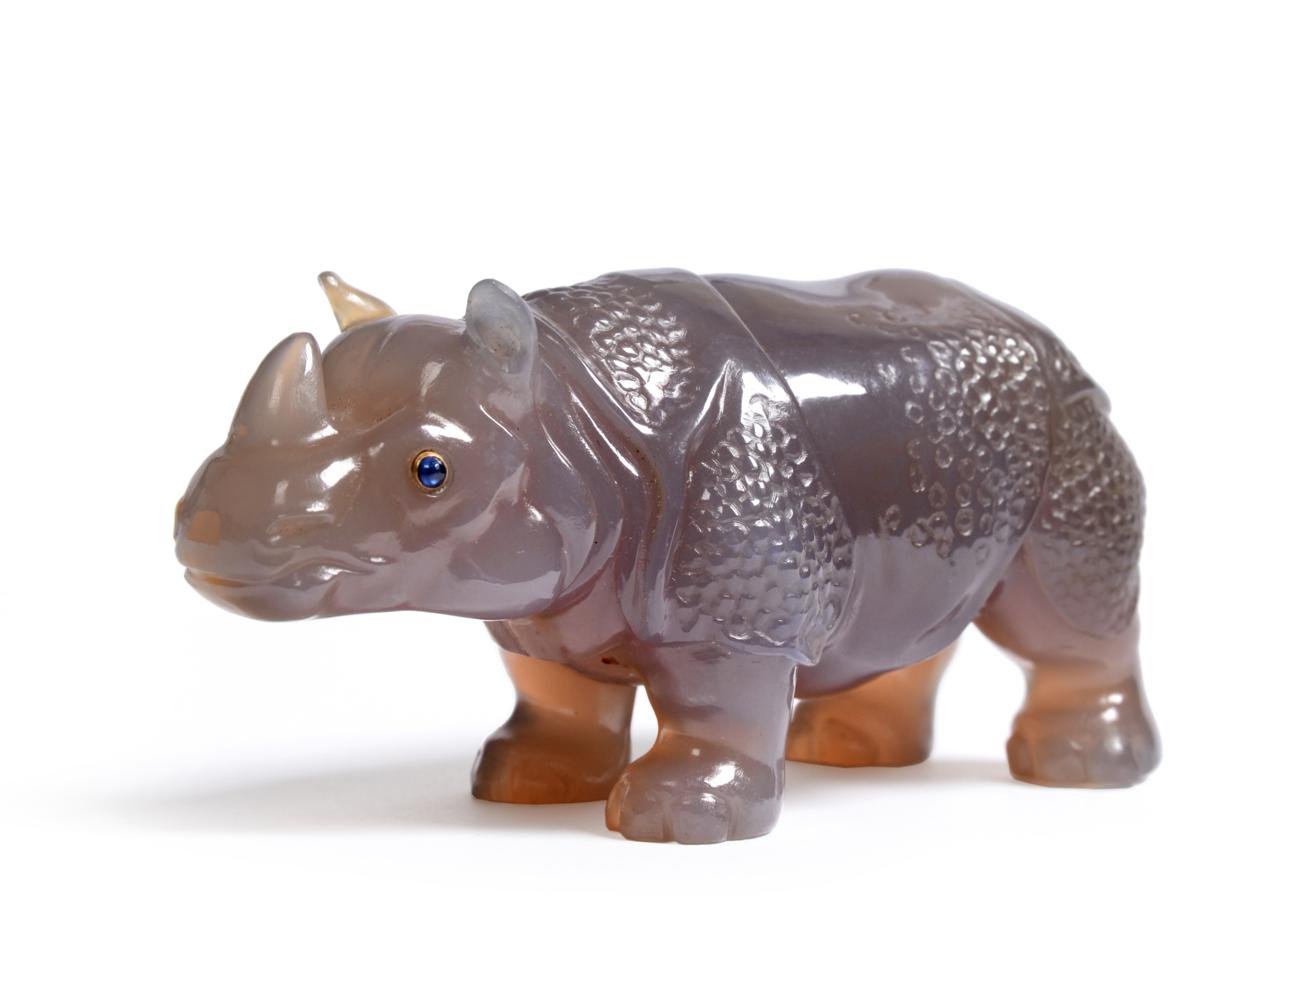 Lot 377 - A Faberge Style Carved Agate Model of an Indian Rhinoceros, 20th century, realistically carved with